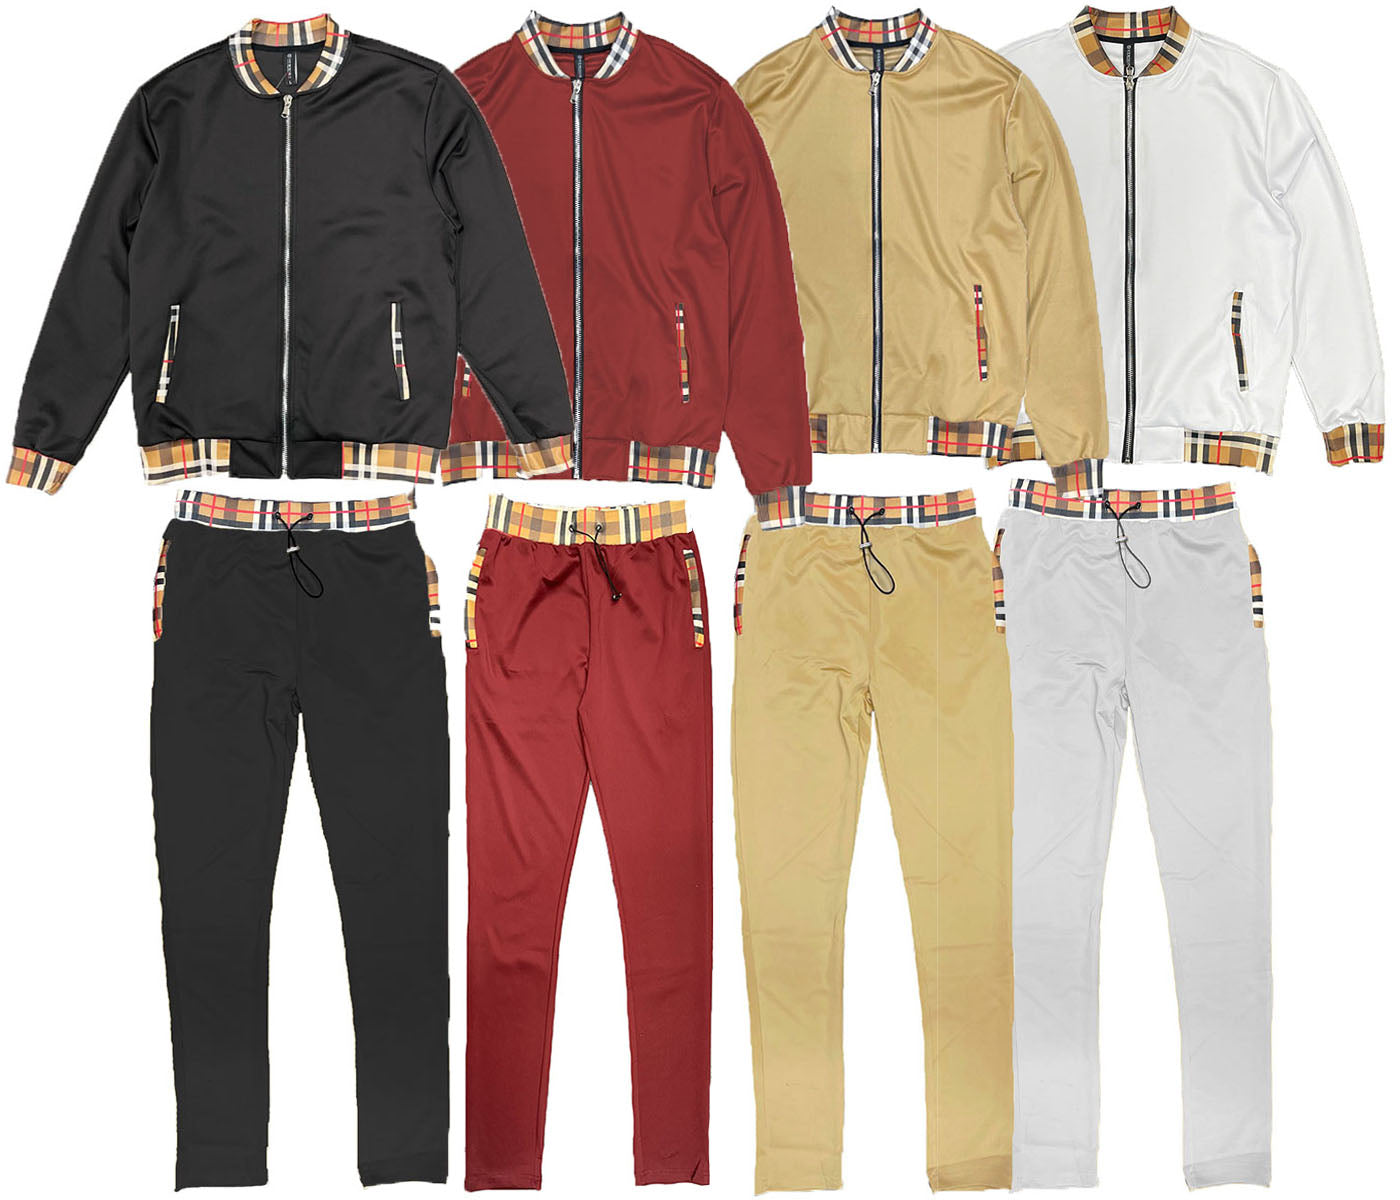 Men's Tracksuit with Plaid all colors next to one another